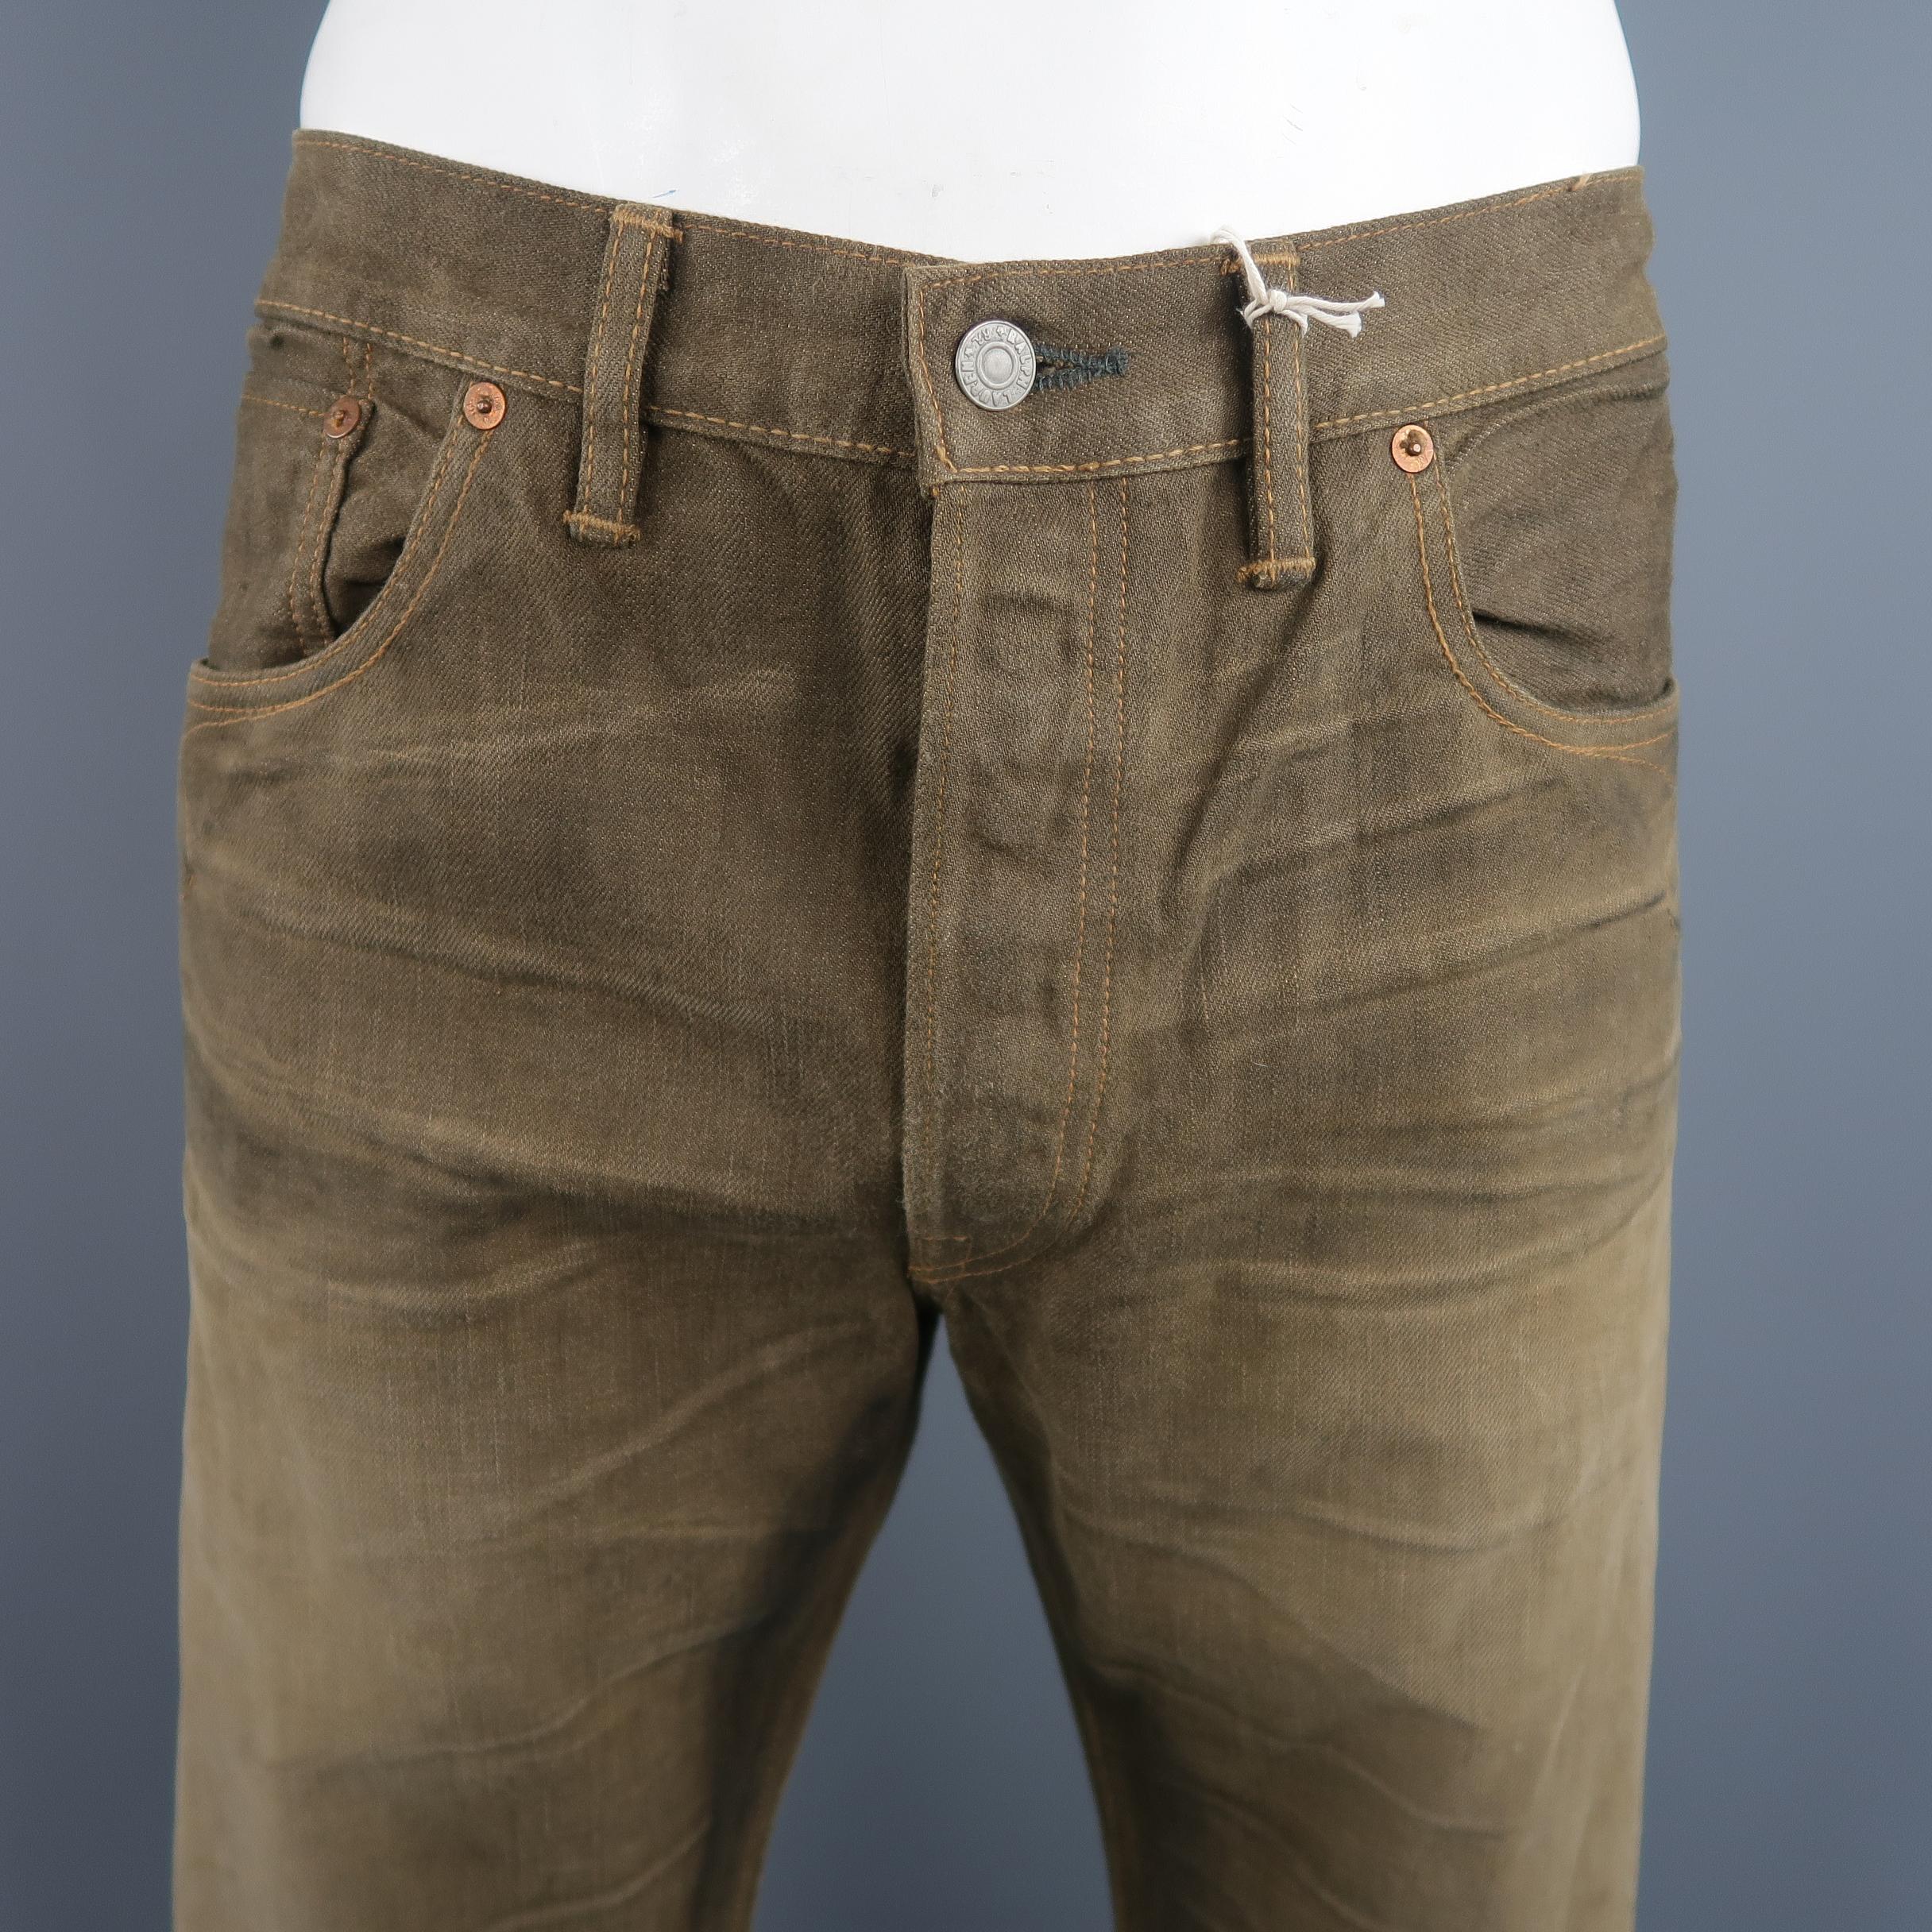 RR By Ralph Lauren  jeans come in olive brown washed selvage denim with a button fly and straight leg. Made in USA.
 
New with Tag.
Marked: 36 x 34
 
Measurements:
 
Waist: 38 in.
Rise: 11 in.
Inseam: 36 in.